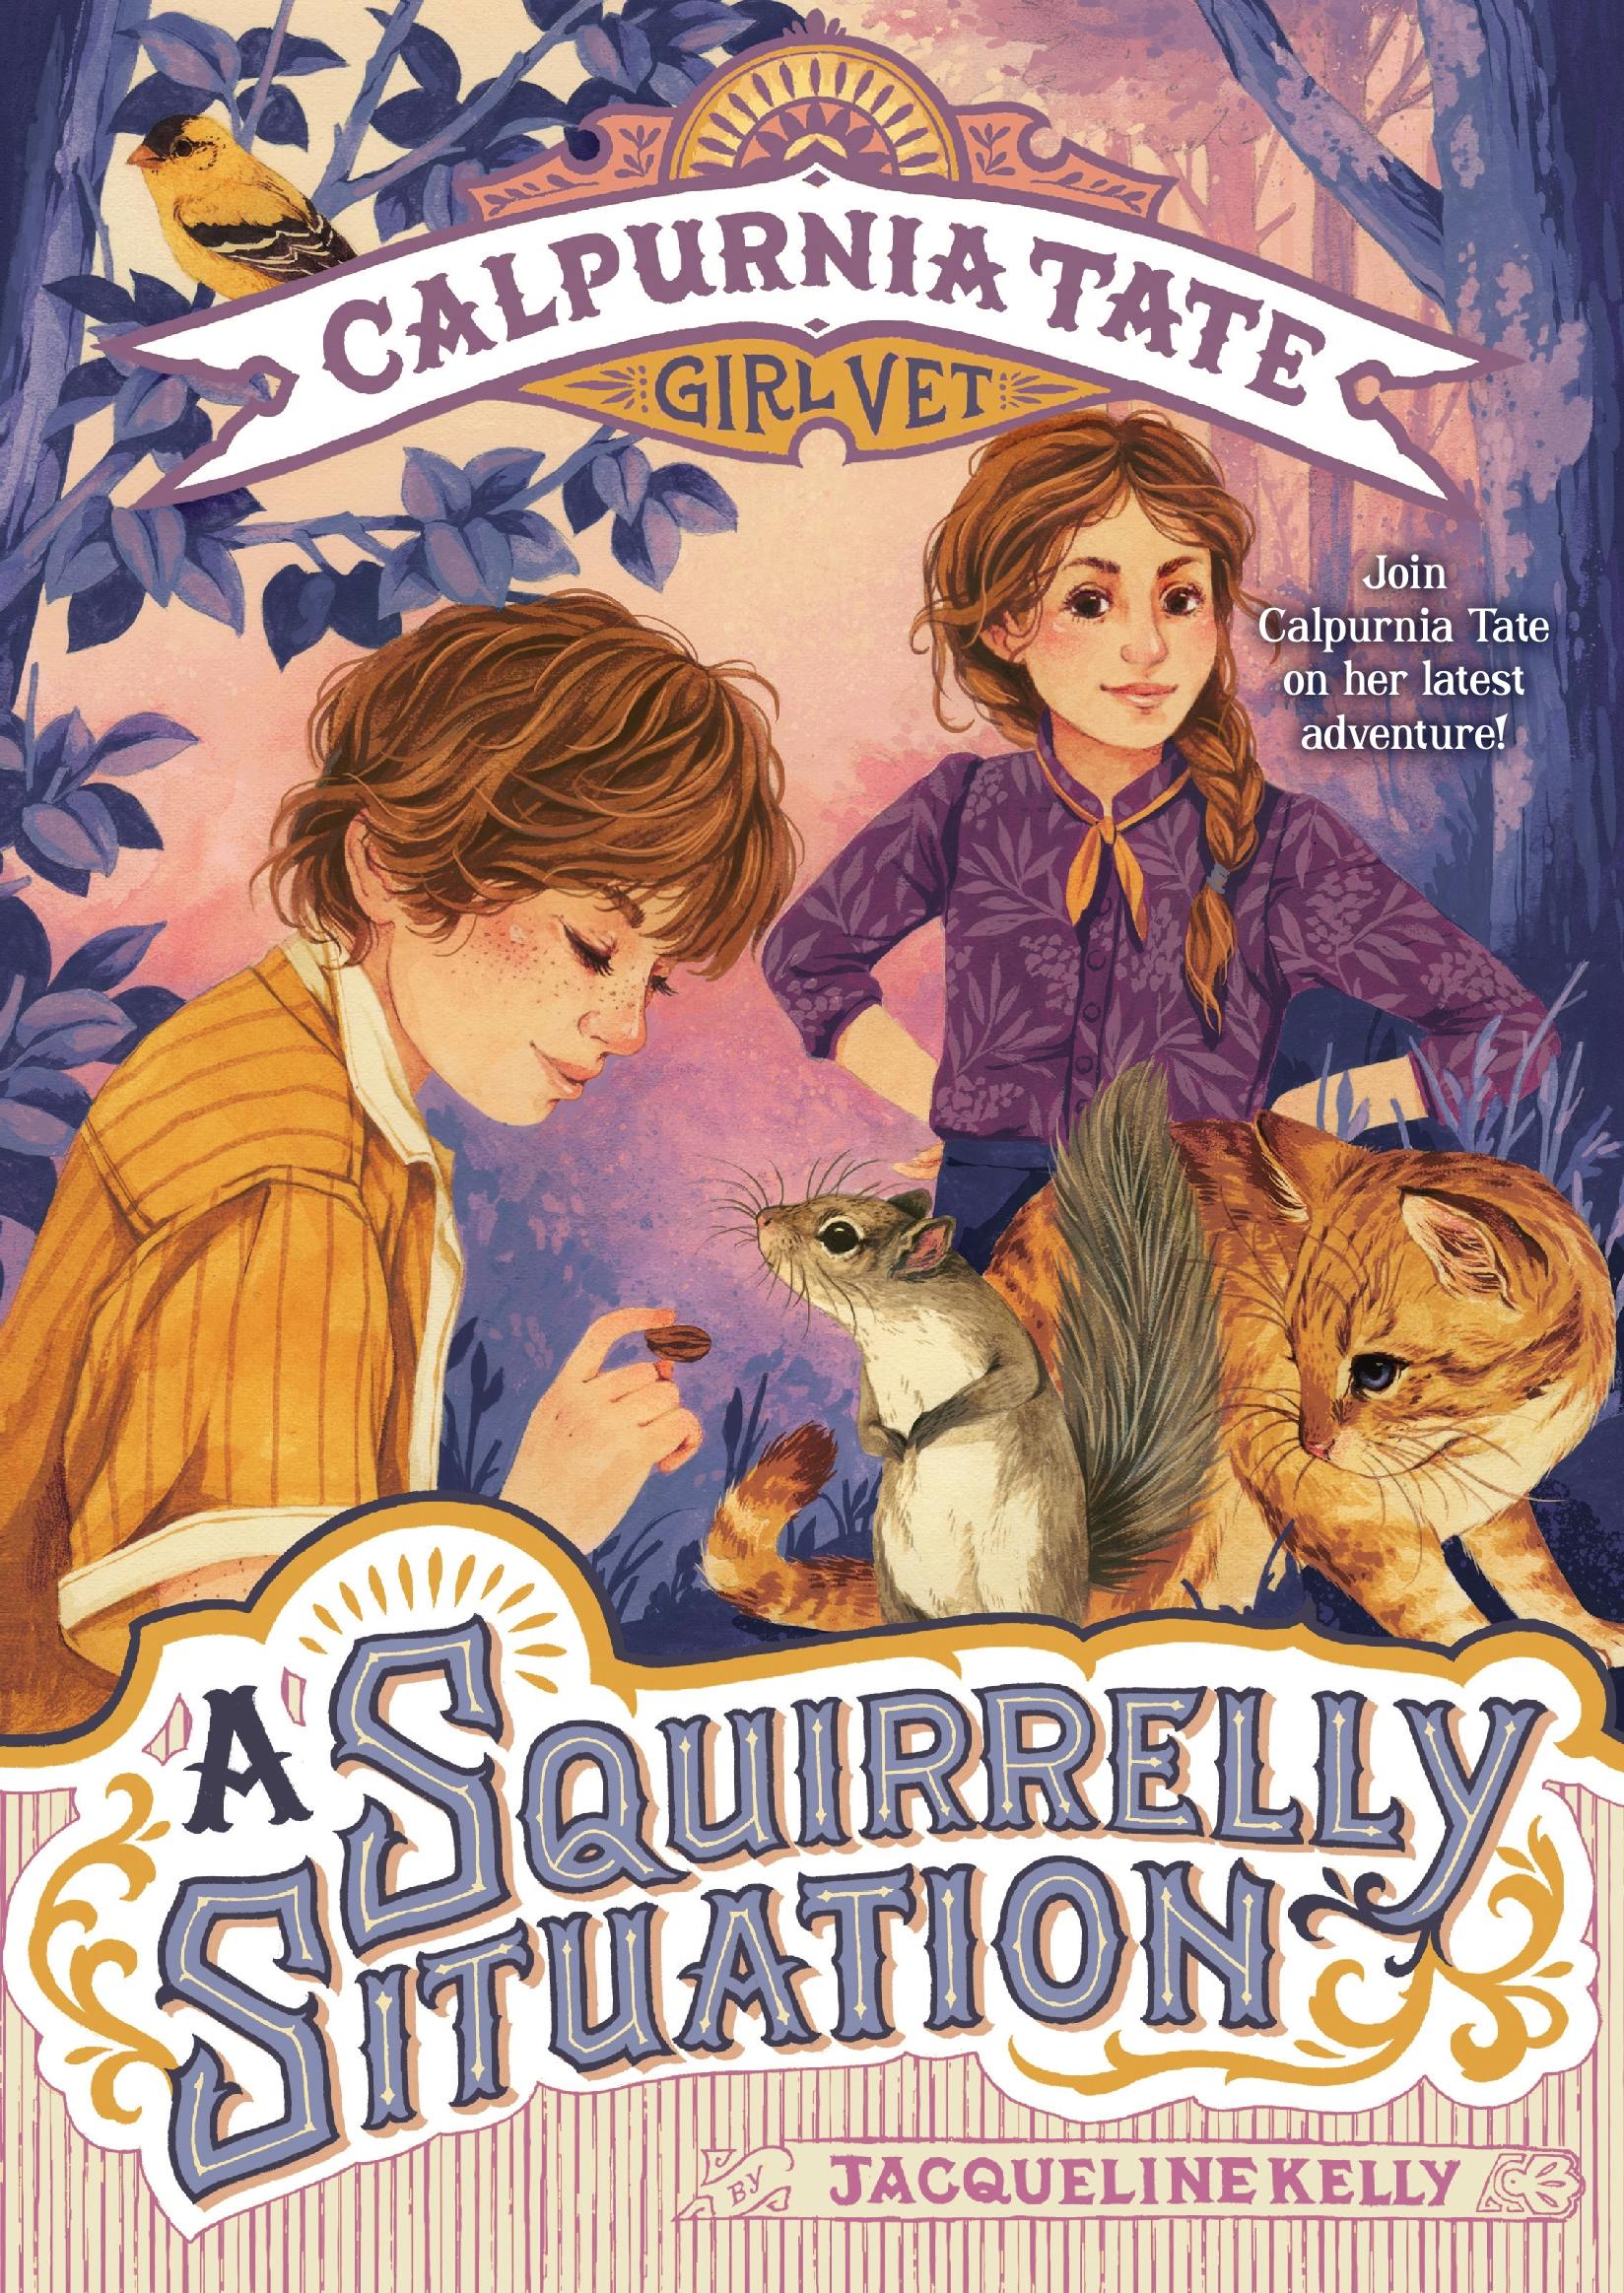 Image of A Squirrelly Situation: Calpurnia Tate, Girl Vet